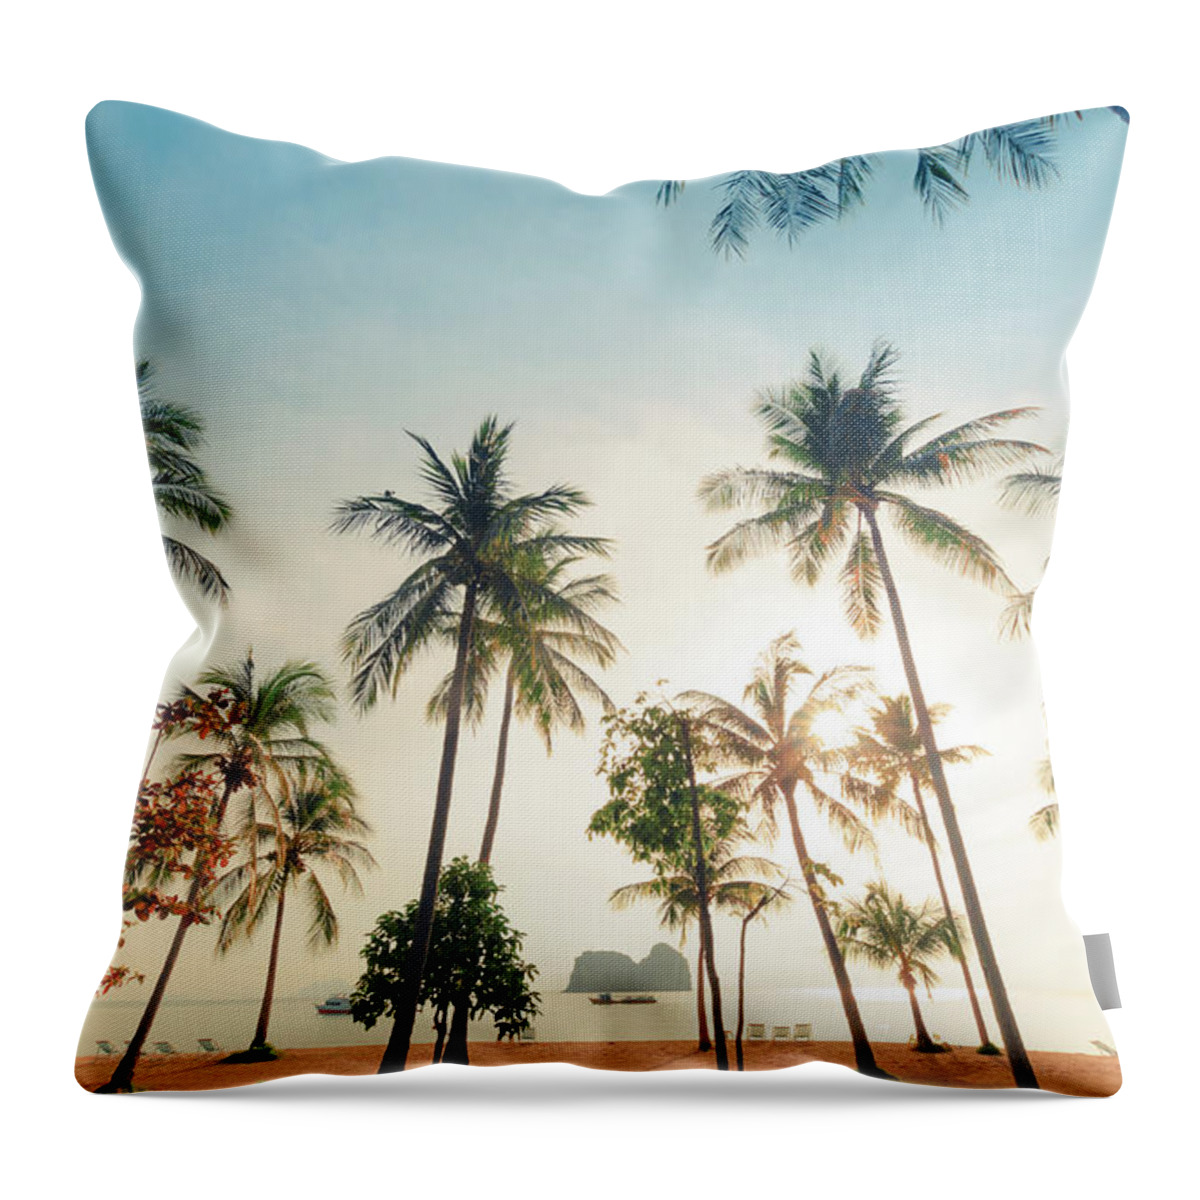 Water's Edge Throw Pillow featuring the photograph Beautiful Coconut Tree At The Beach by Primeimages